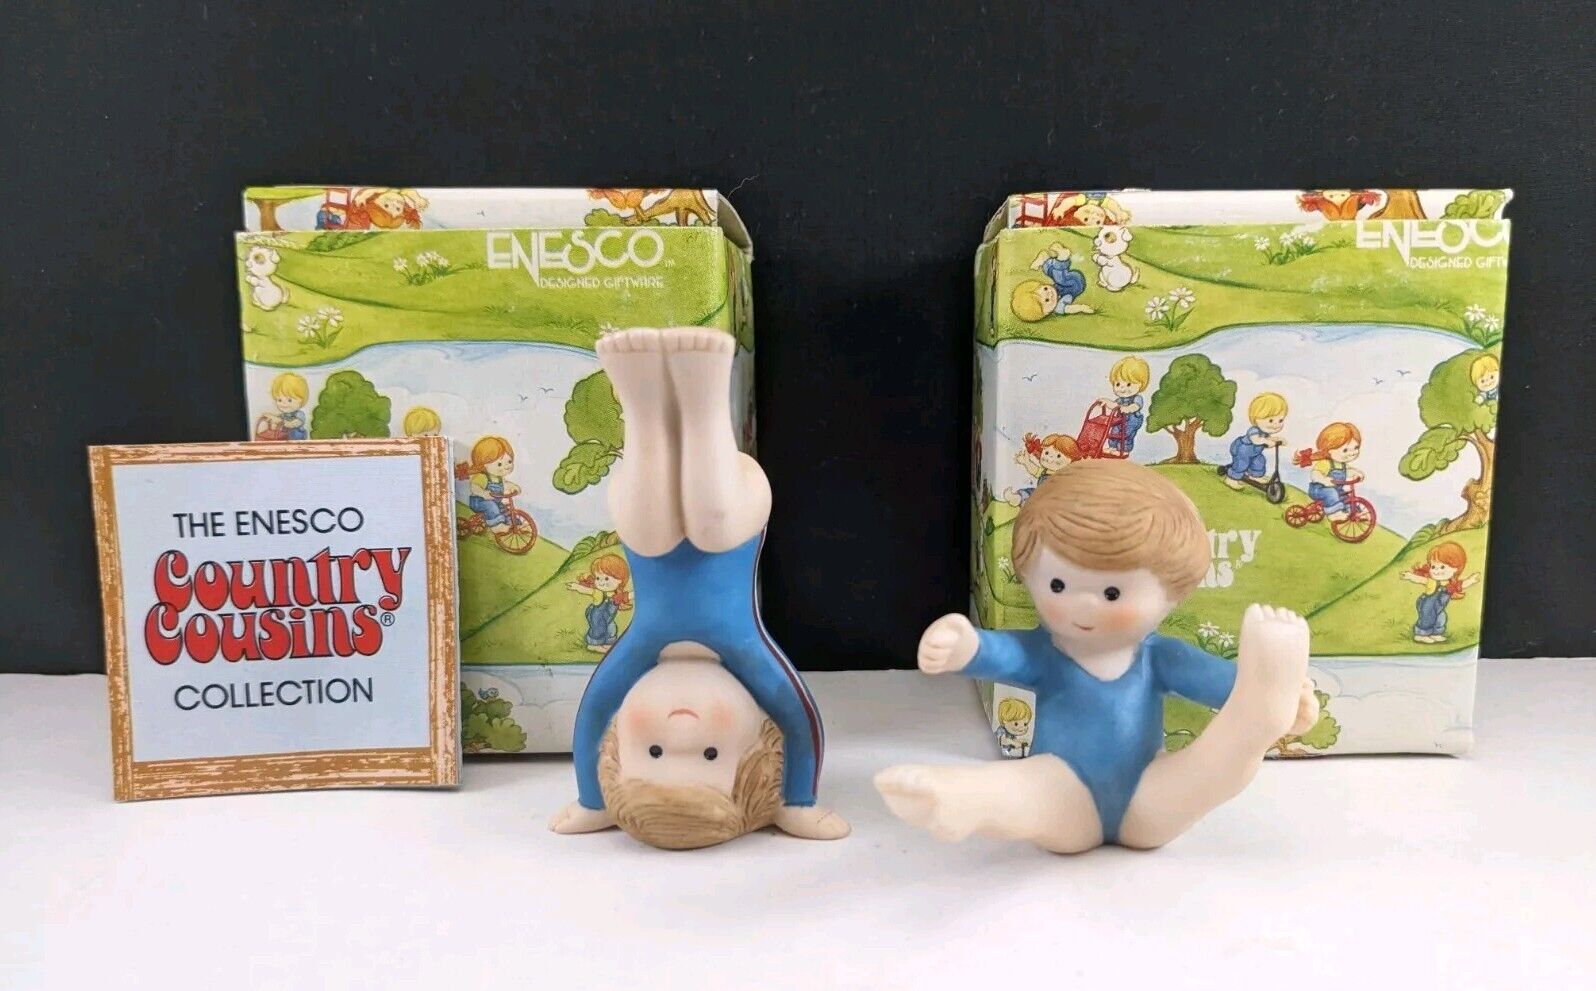 Two Vintage Country Cousins Polly 1983 Gymnastics Porcelain Figurines By Enesco